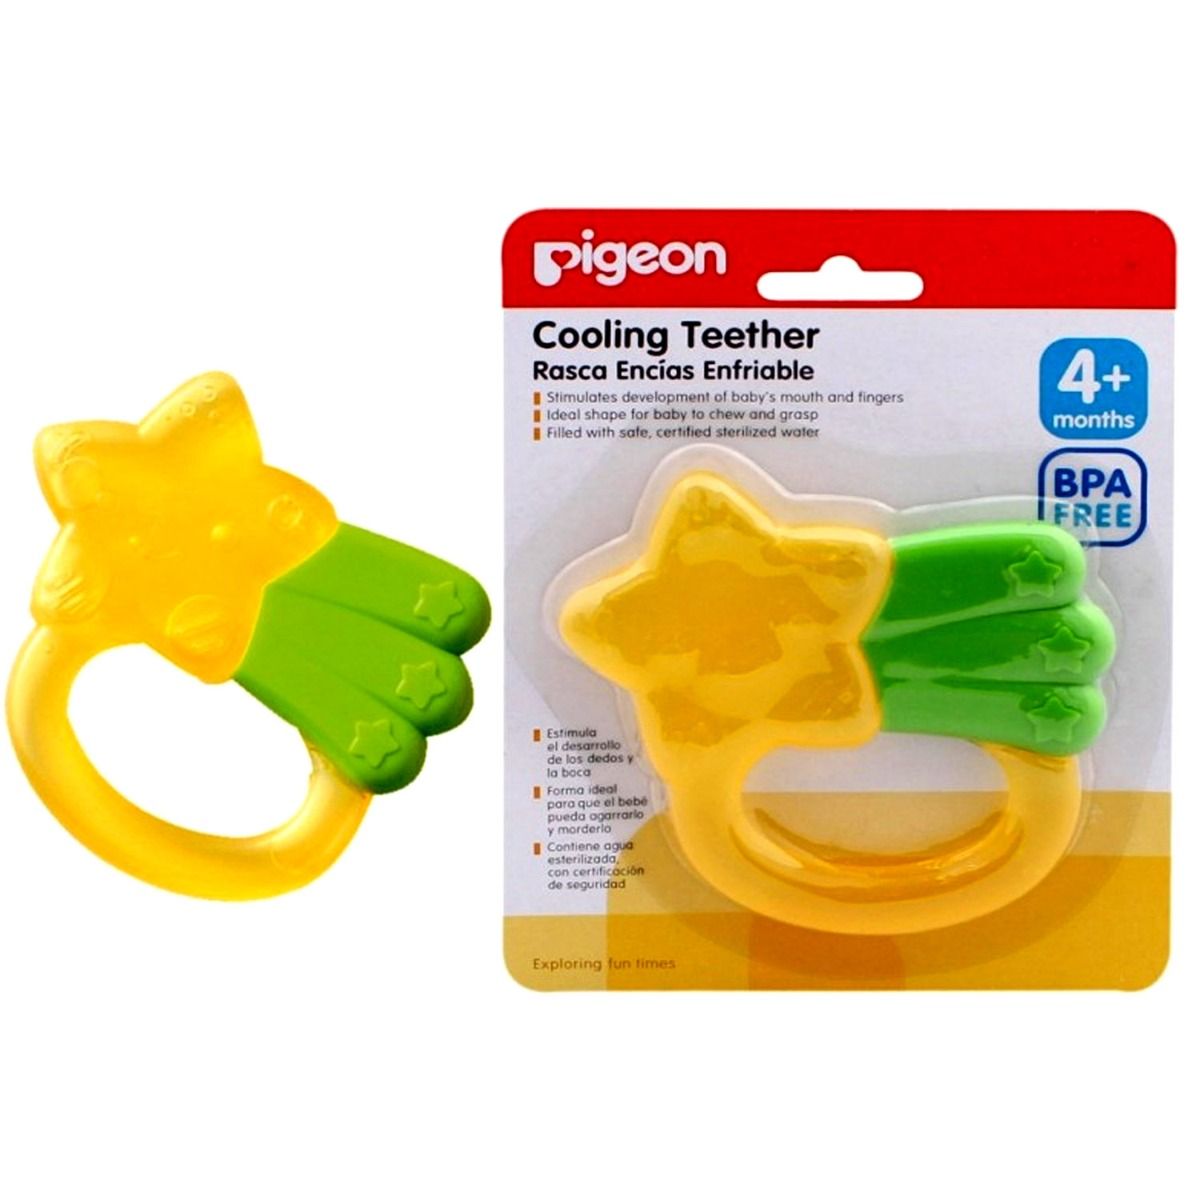 Pigeon Star Shape Cooling Teether, 1 Count, Pack of 1 